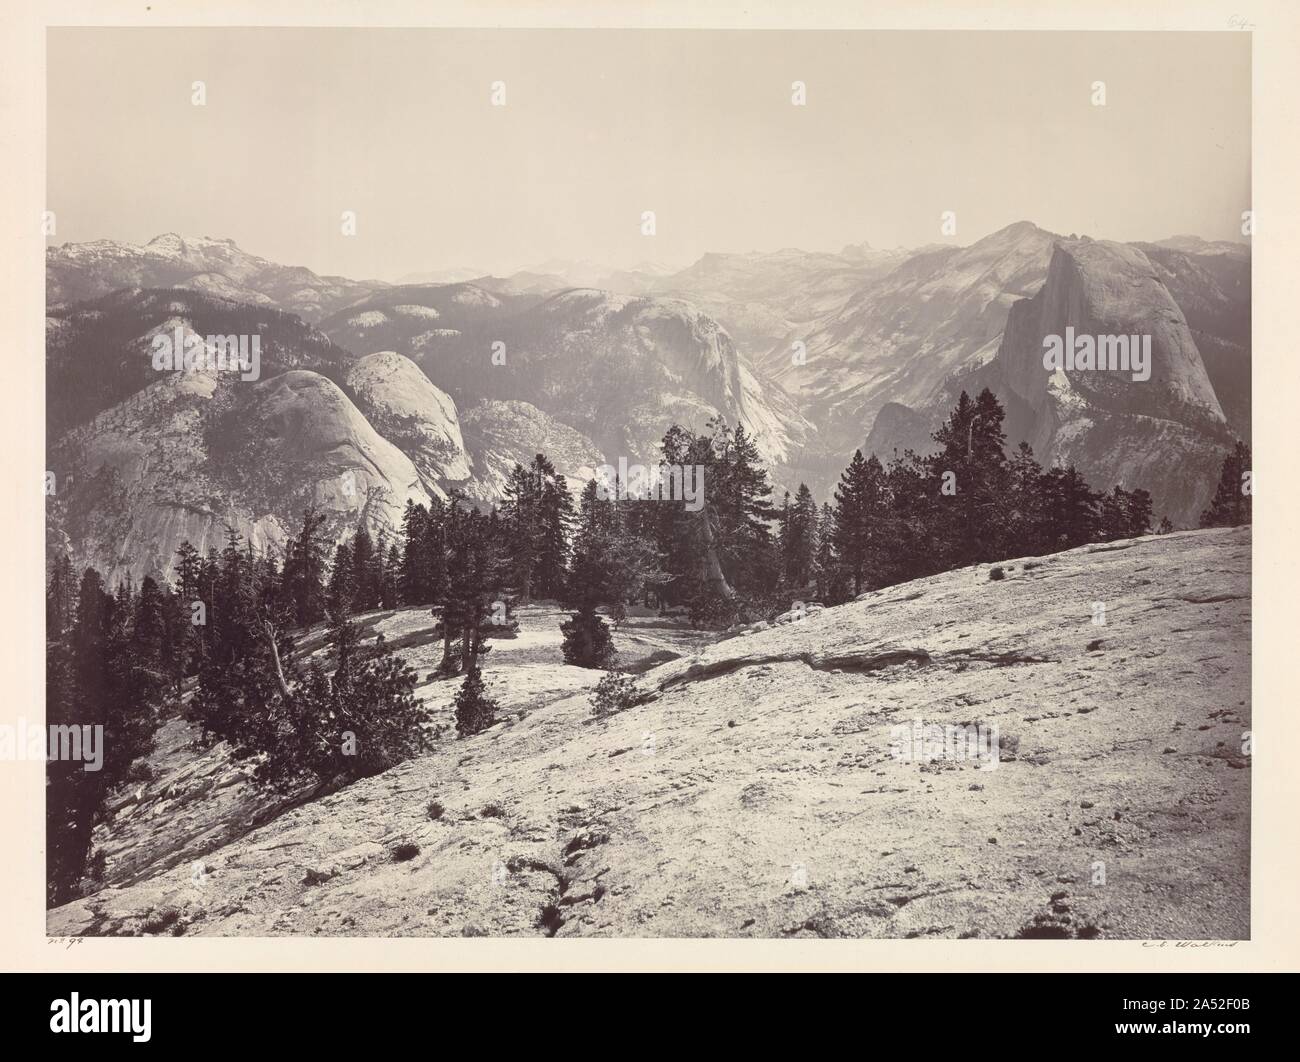 The Domes, from the Sentinel Domes, Yosemite, c. 1865-1866. Although prolific in all types of commercial photography, Carleton Watkins was best known for his majestic images of Yosemite Valley. He first transported his mammoth-plate camera there in 1861 and returned many times to record America's natural treasure. Besides establishing aesthetic and technical standards of excellence for landscape photography, Watkins's work was instrumental in passing the 1864 Congressional bill enacted to protect Yosemite from development. In this panoramic view, he displayed elegantly curved rock formations i Stock Photo